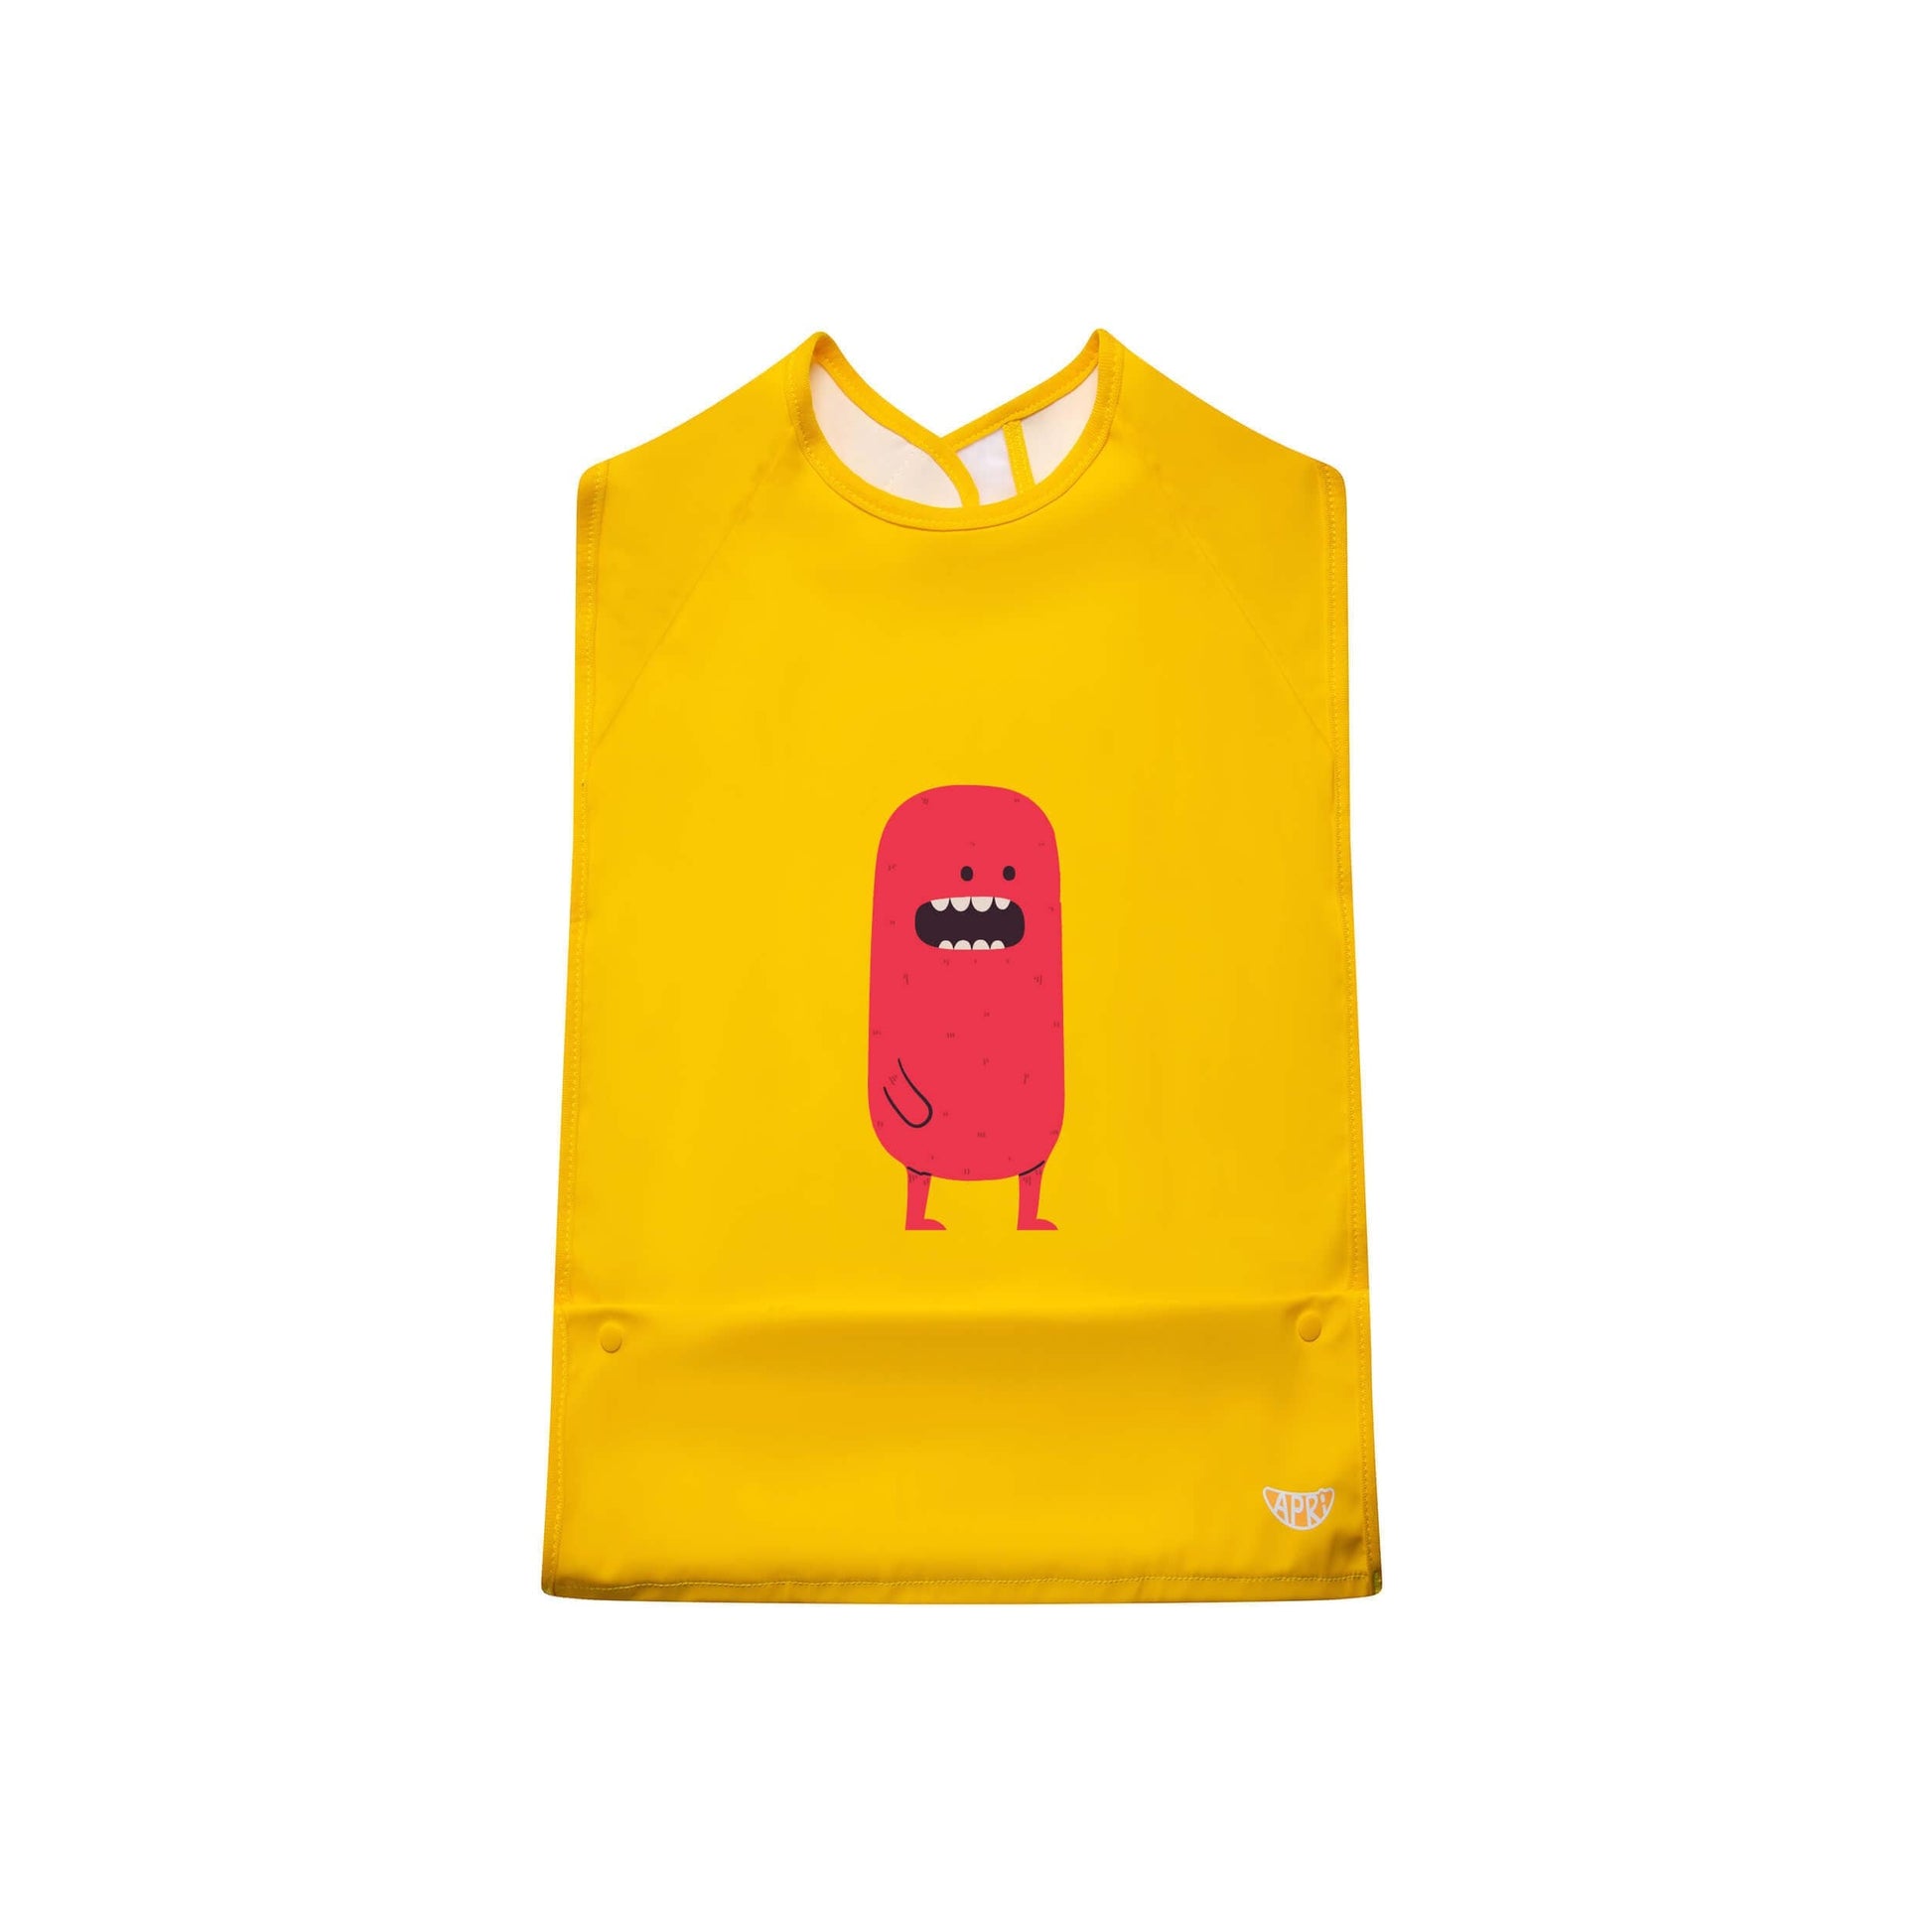 Waterproof bib for kids, teens and adults with disabilities. Bold yellow sleeveless bib with food pocket and cute monster print